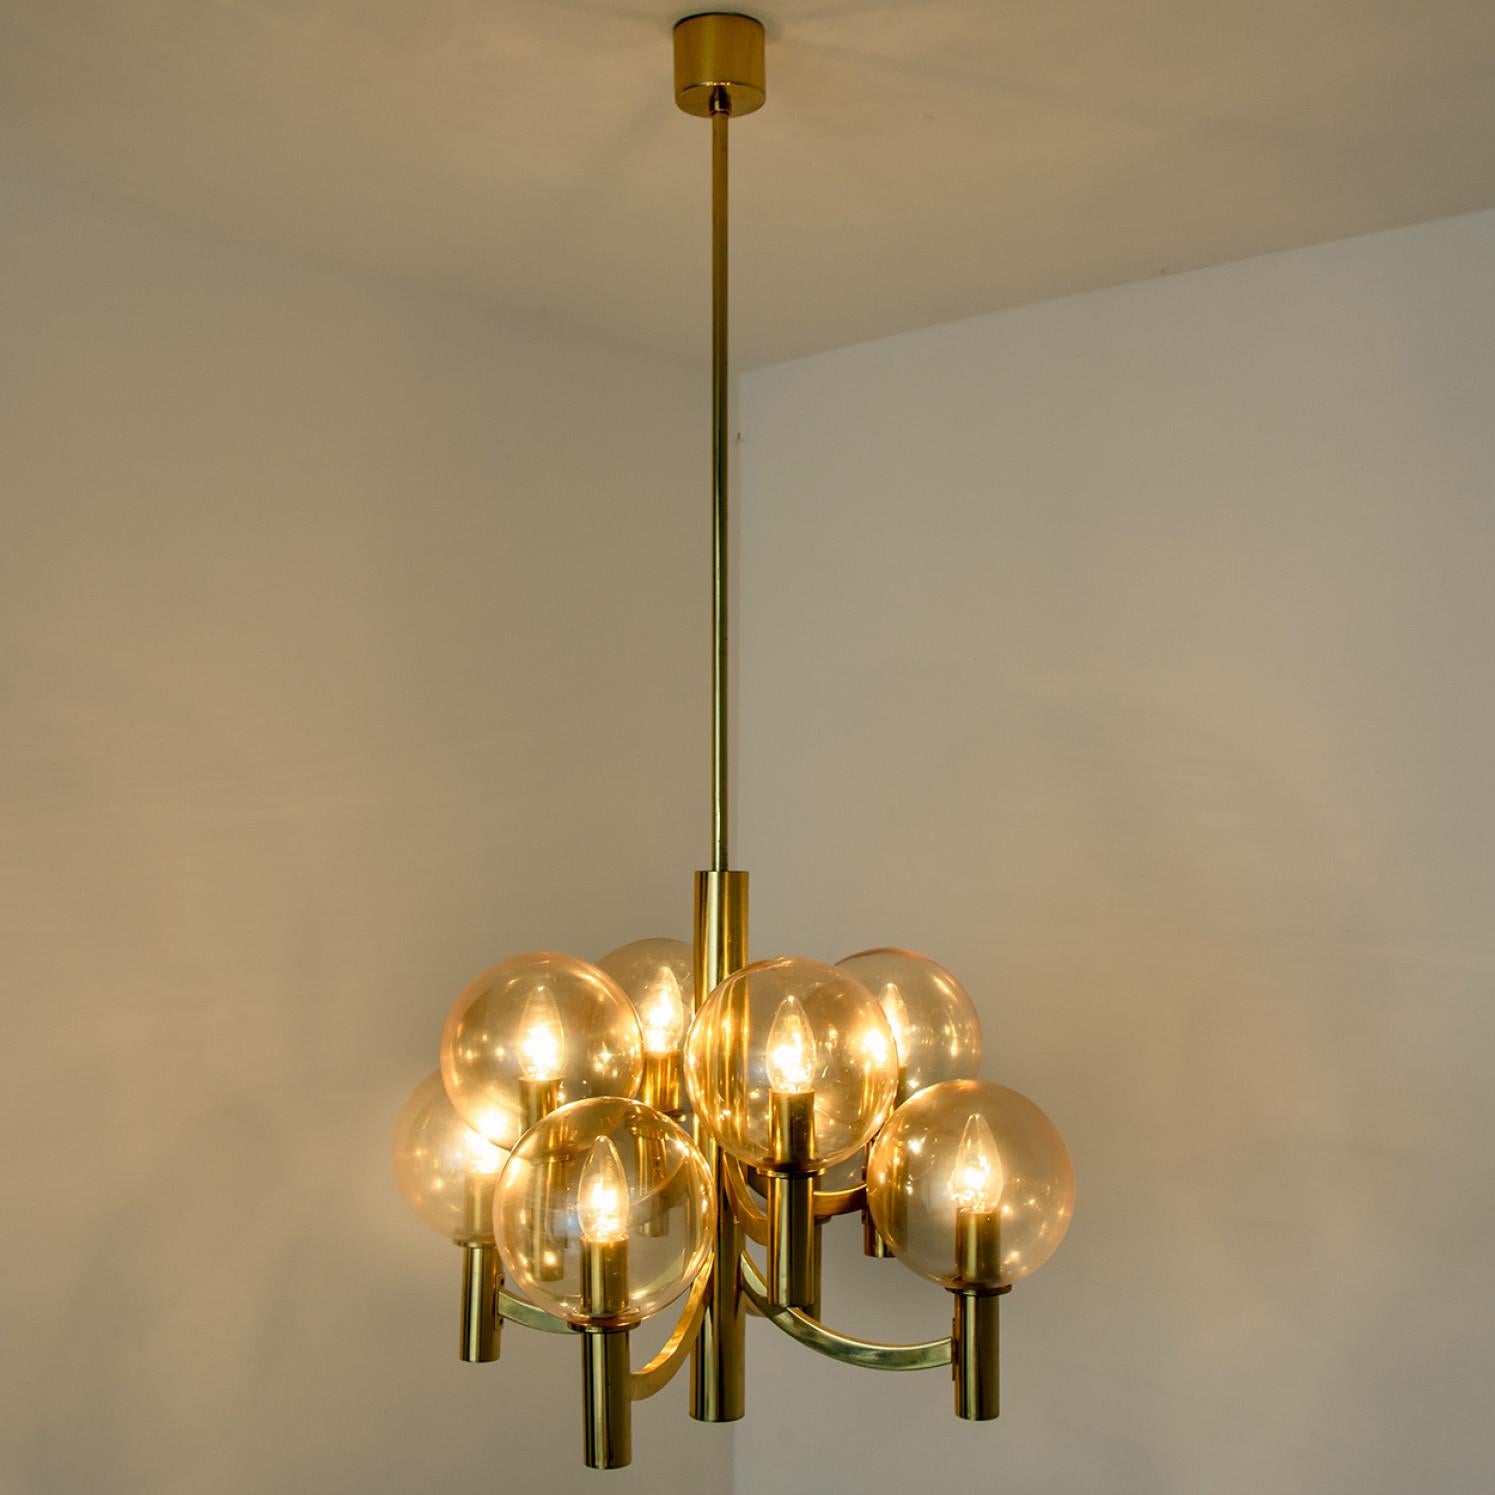 Brass and Clear Glass Chandelier, Jakobsson, 1970s For Sale 10